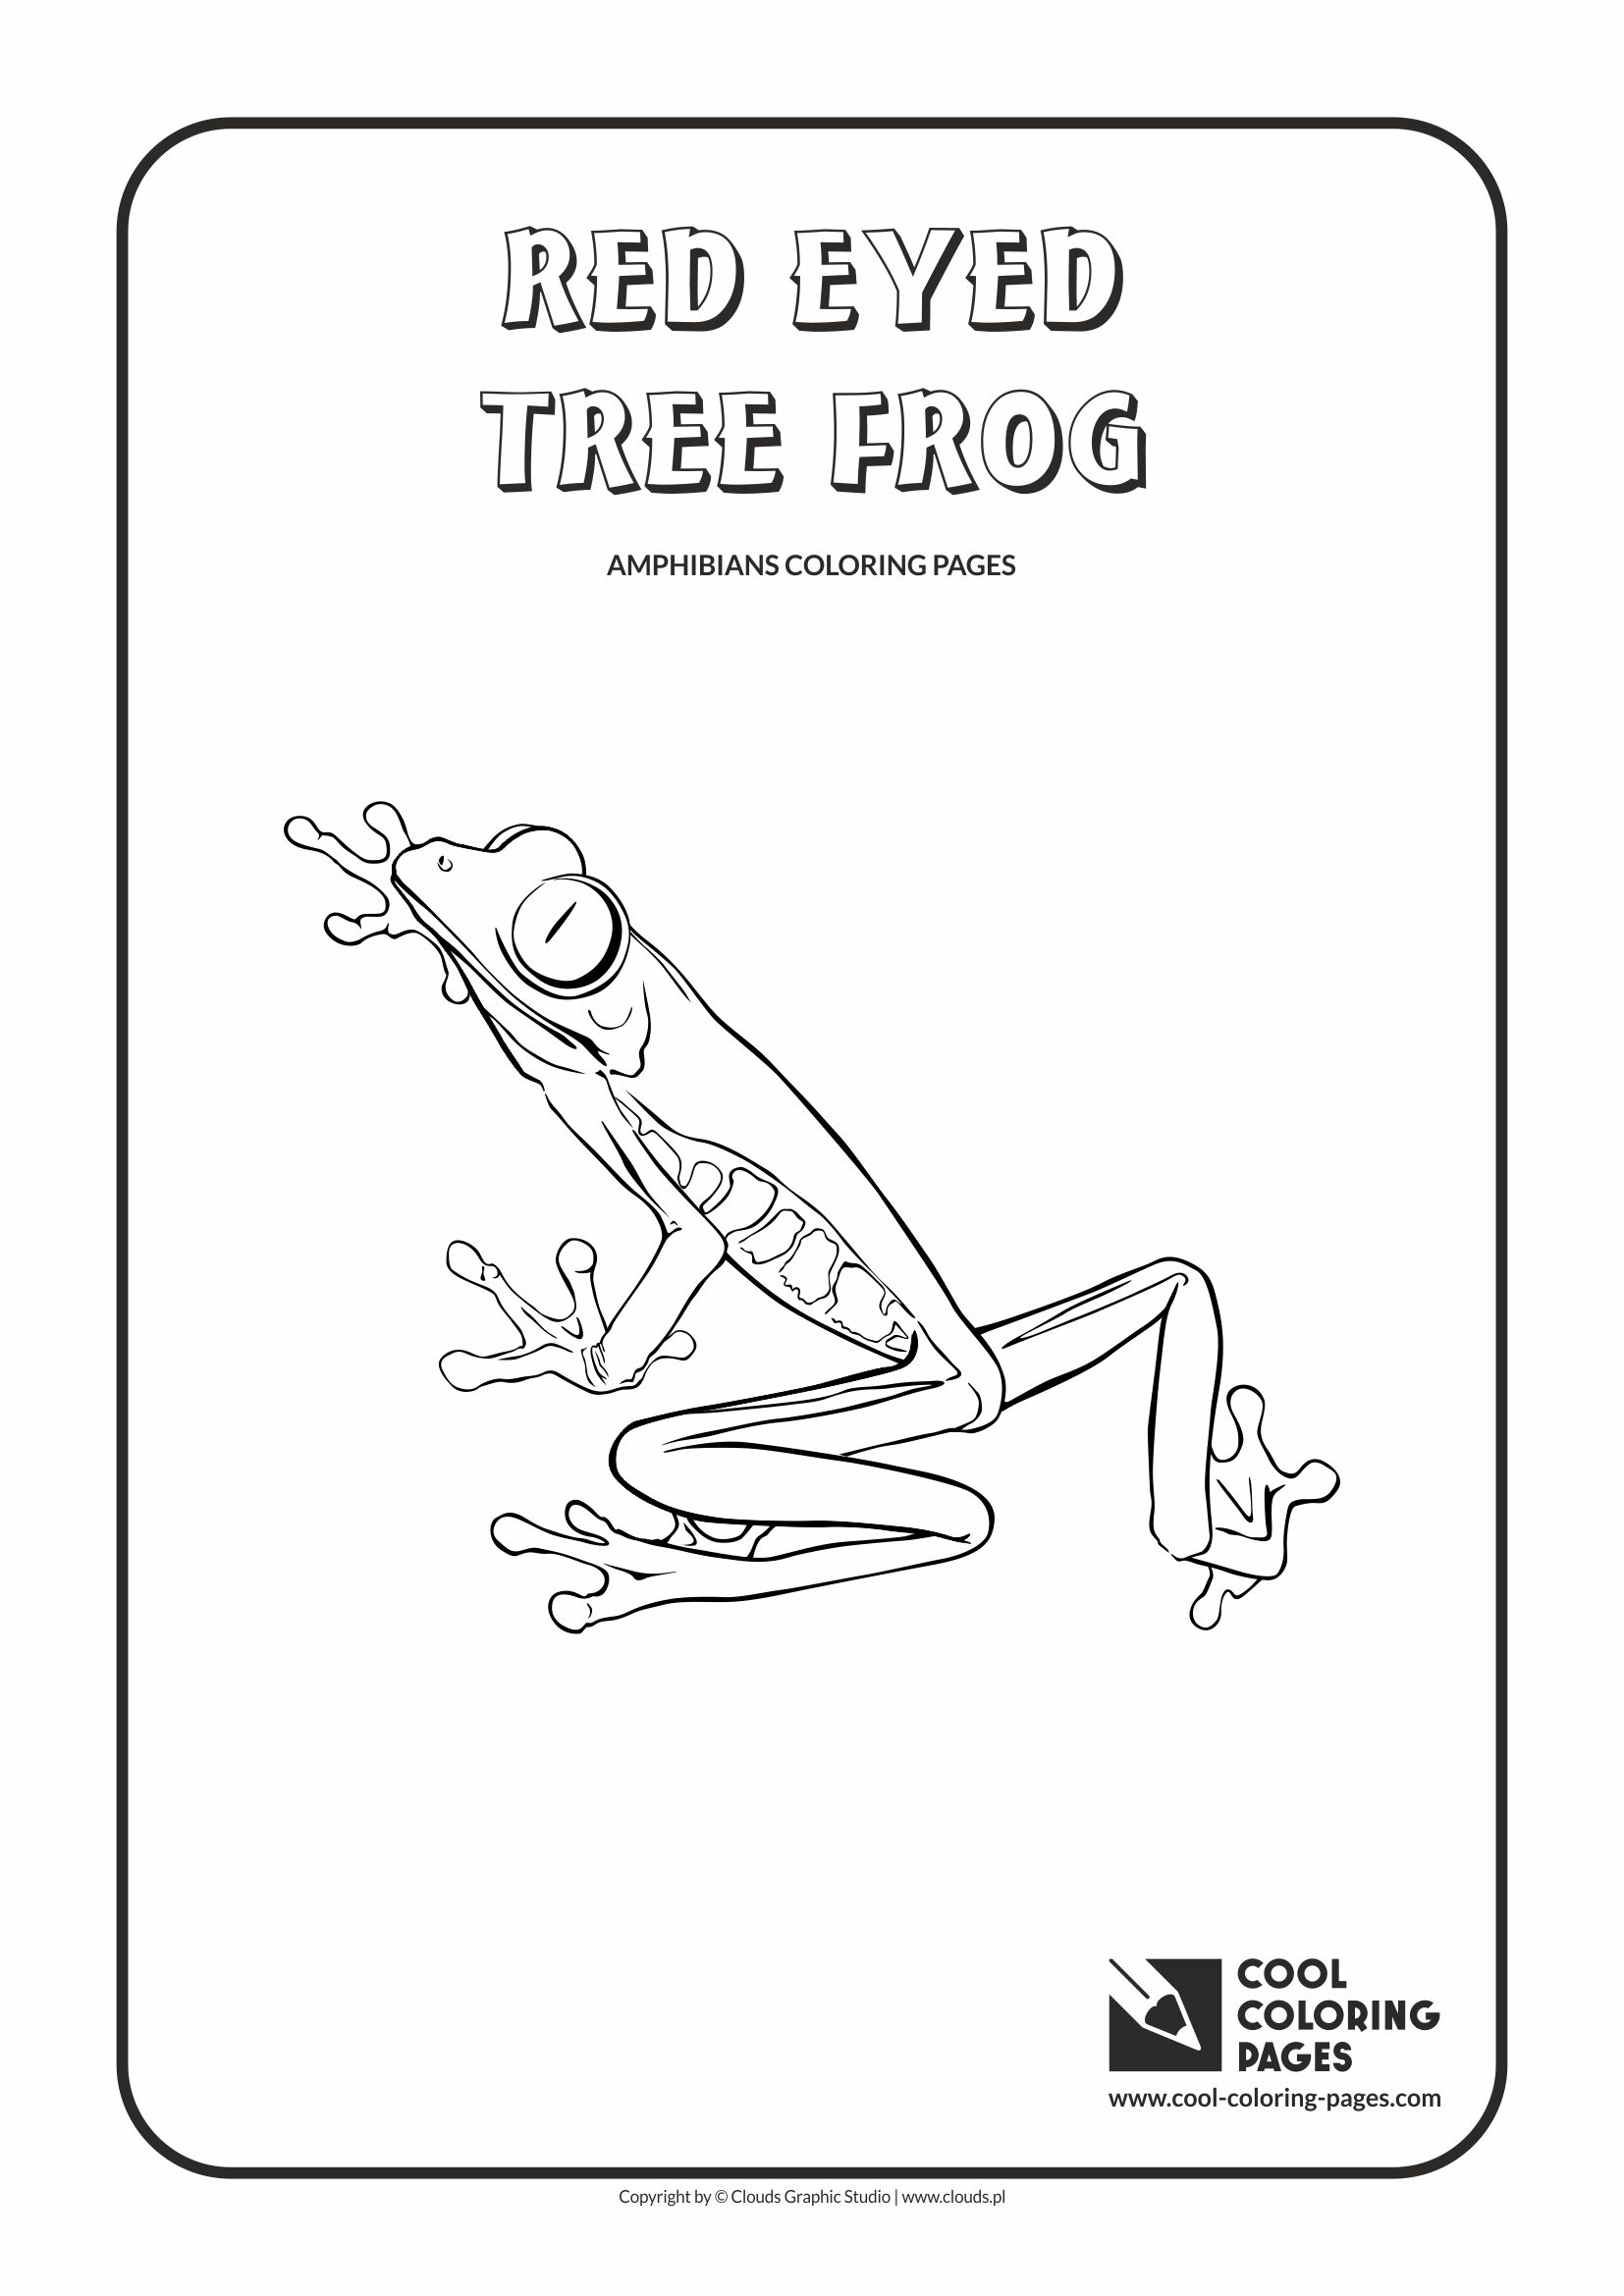 Cool coloring pages red eyed tree frog coloring page